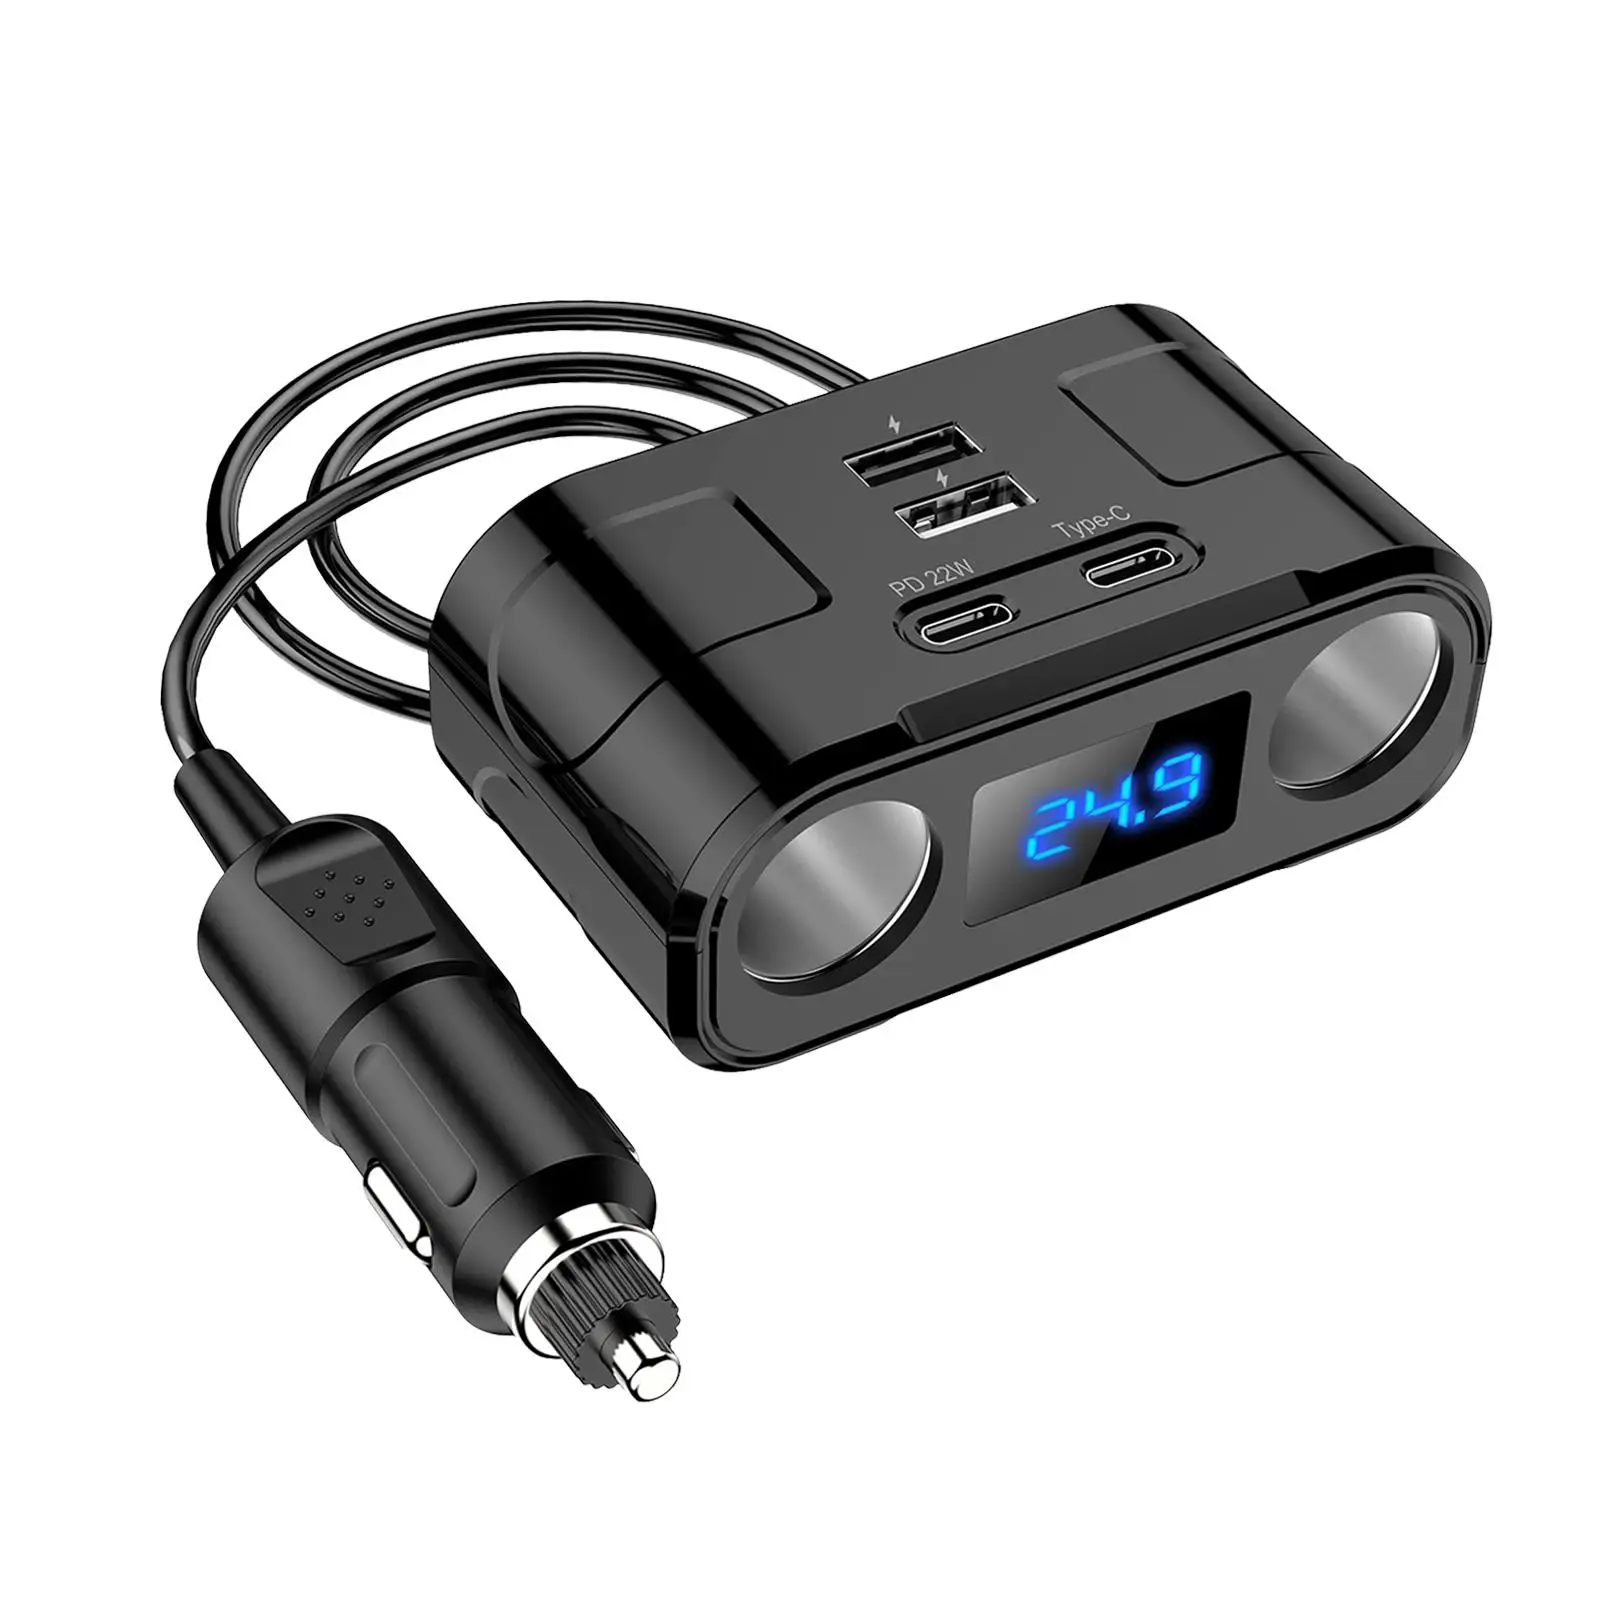 Car Cigarette Lighter Charger 12V Car Charger Easy to Install LED Display Durable for Motocar Vehicle Marine Accessories